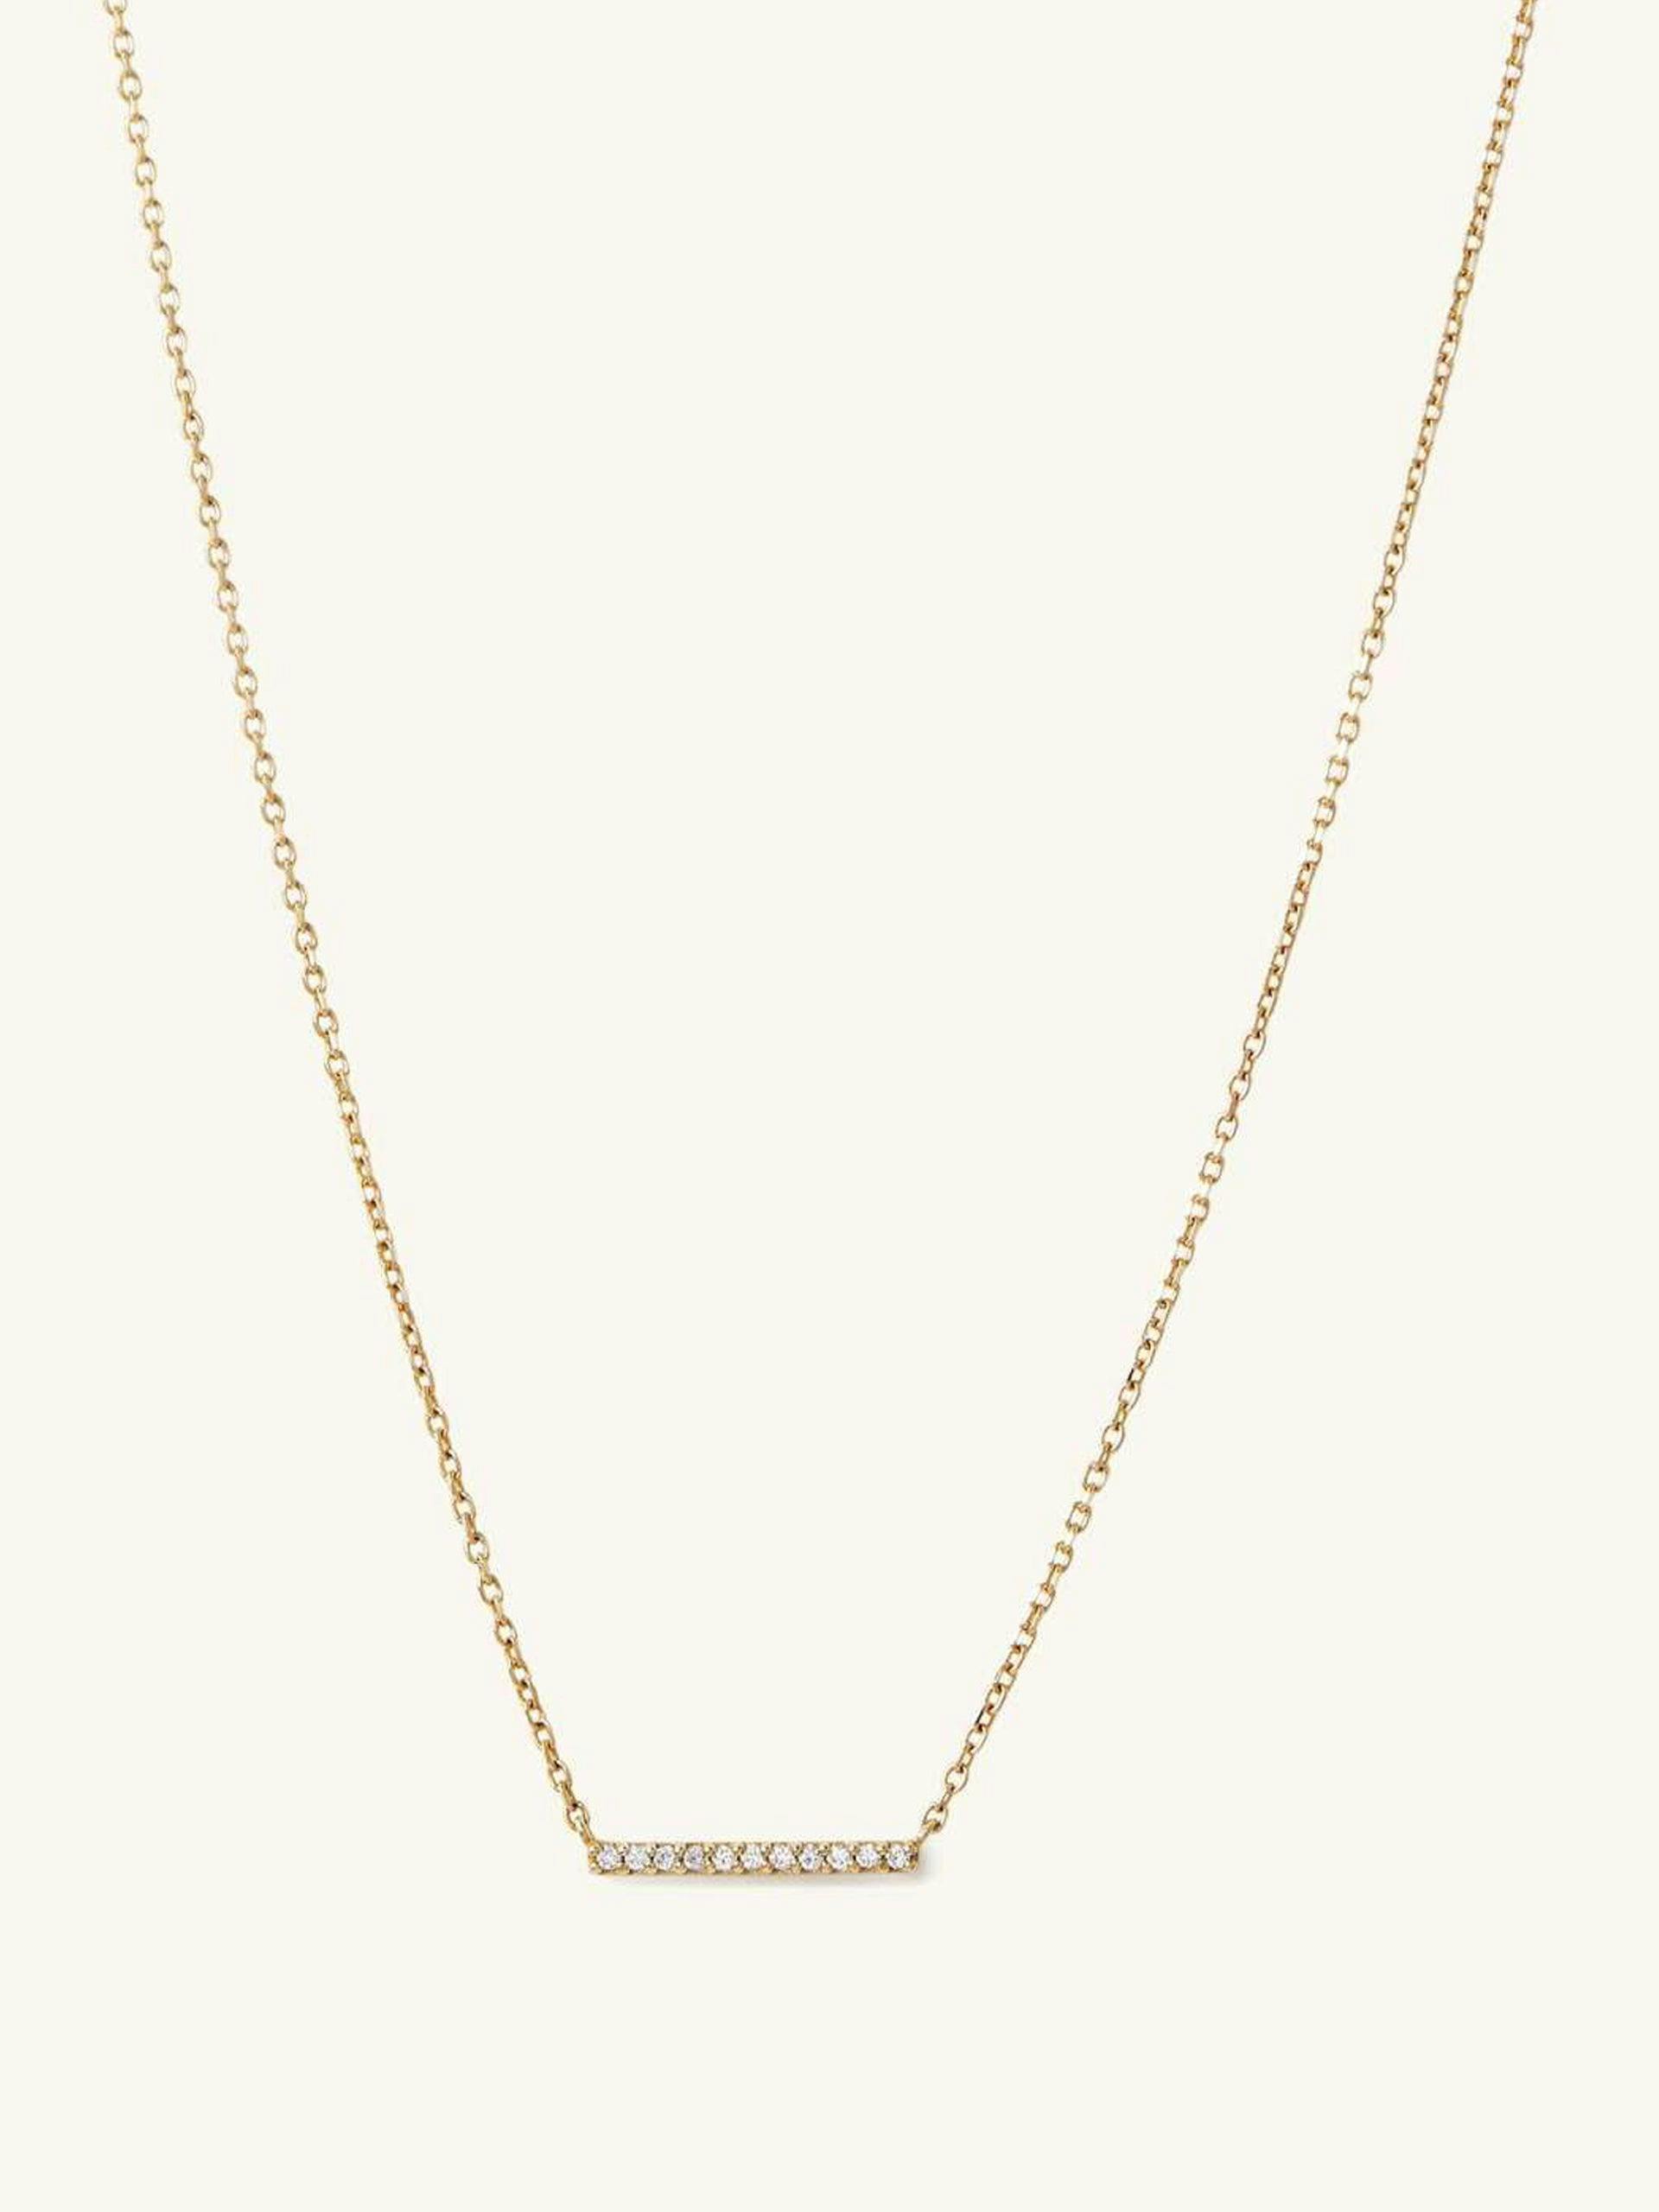 14k gold and diamond necklace